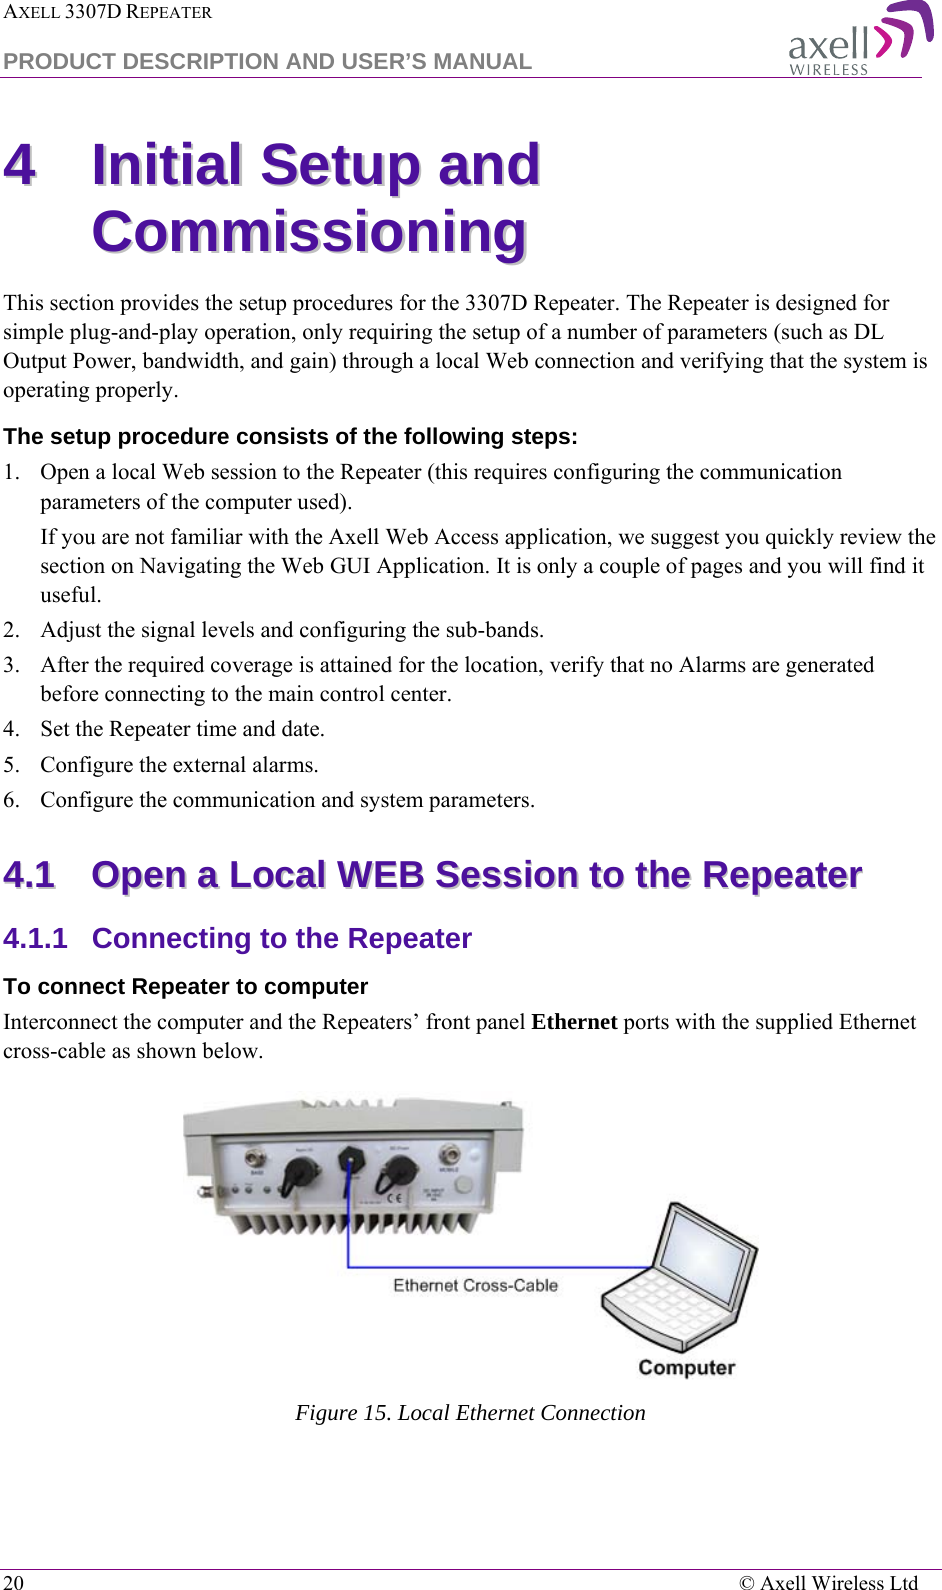 AXELL 3307D REPEATER  PRODUCT DESCRIPTION AND USER’S MANUAL  20    © Axell Wireless Ltd 44  IInniittiiaall  SSeettuupp  aanndd  CCoommmmiissssiioonniinngg  This section provides the setup procedures for the 3307D Repeater. The Repeater is designed for simple plug-and-play operation, only requiring the setup of a number of parameters (such as DL Output Power, bandwidth, and gain) through a local Web connection and verifying that the system is operating properly.  The setup procedure consists of the following steps: 1.  Open a local Web session to the Repeater (this requires configuring the communication parameters of the computer used). If you are not familiar with the Axell Web Access application, we suggest you quickly review the section on Navigating the Web GUI Application. It is only a couple of pages and you will find it useful. 2.  Adjust the signal levels and configuring the sub-bands. 3.  After the required coverage is attained for the location, verify that no Alarms are generated before connecting to the main control center. 4.  Set the Repeater time and date.  5.  Configure the external alarms. 6.  Configure the communication and system parameters.  44..11  OOppeenn  aa  LLooccaall  WWEEBB  SSeessssiioonn  ttoo  tthhee  RReeppeeaatteerr  4.1.1  Connecting to the Repeater To connect Repeater to computer Interconnect the computer and the Repeaters’ front panel Ethernet ports with the supplied Ethernet cross-cable as shown below.  Figure 15. Local Ethernet Connection 